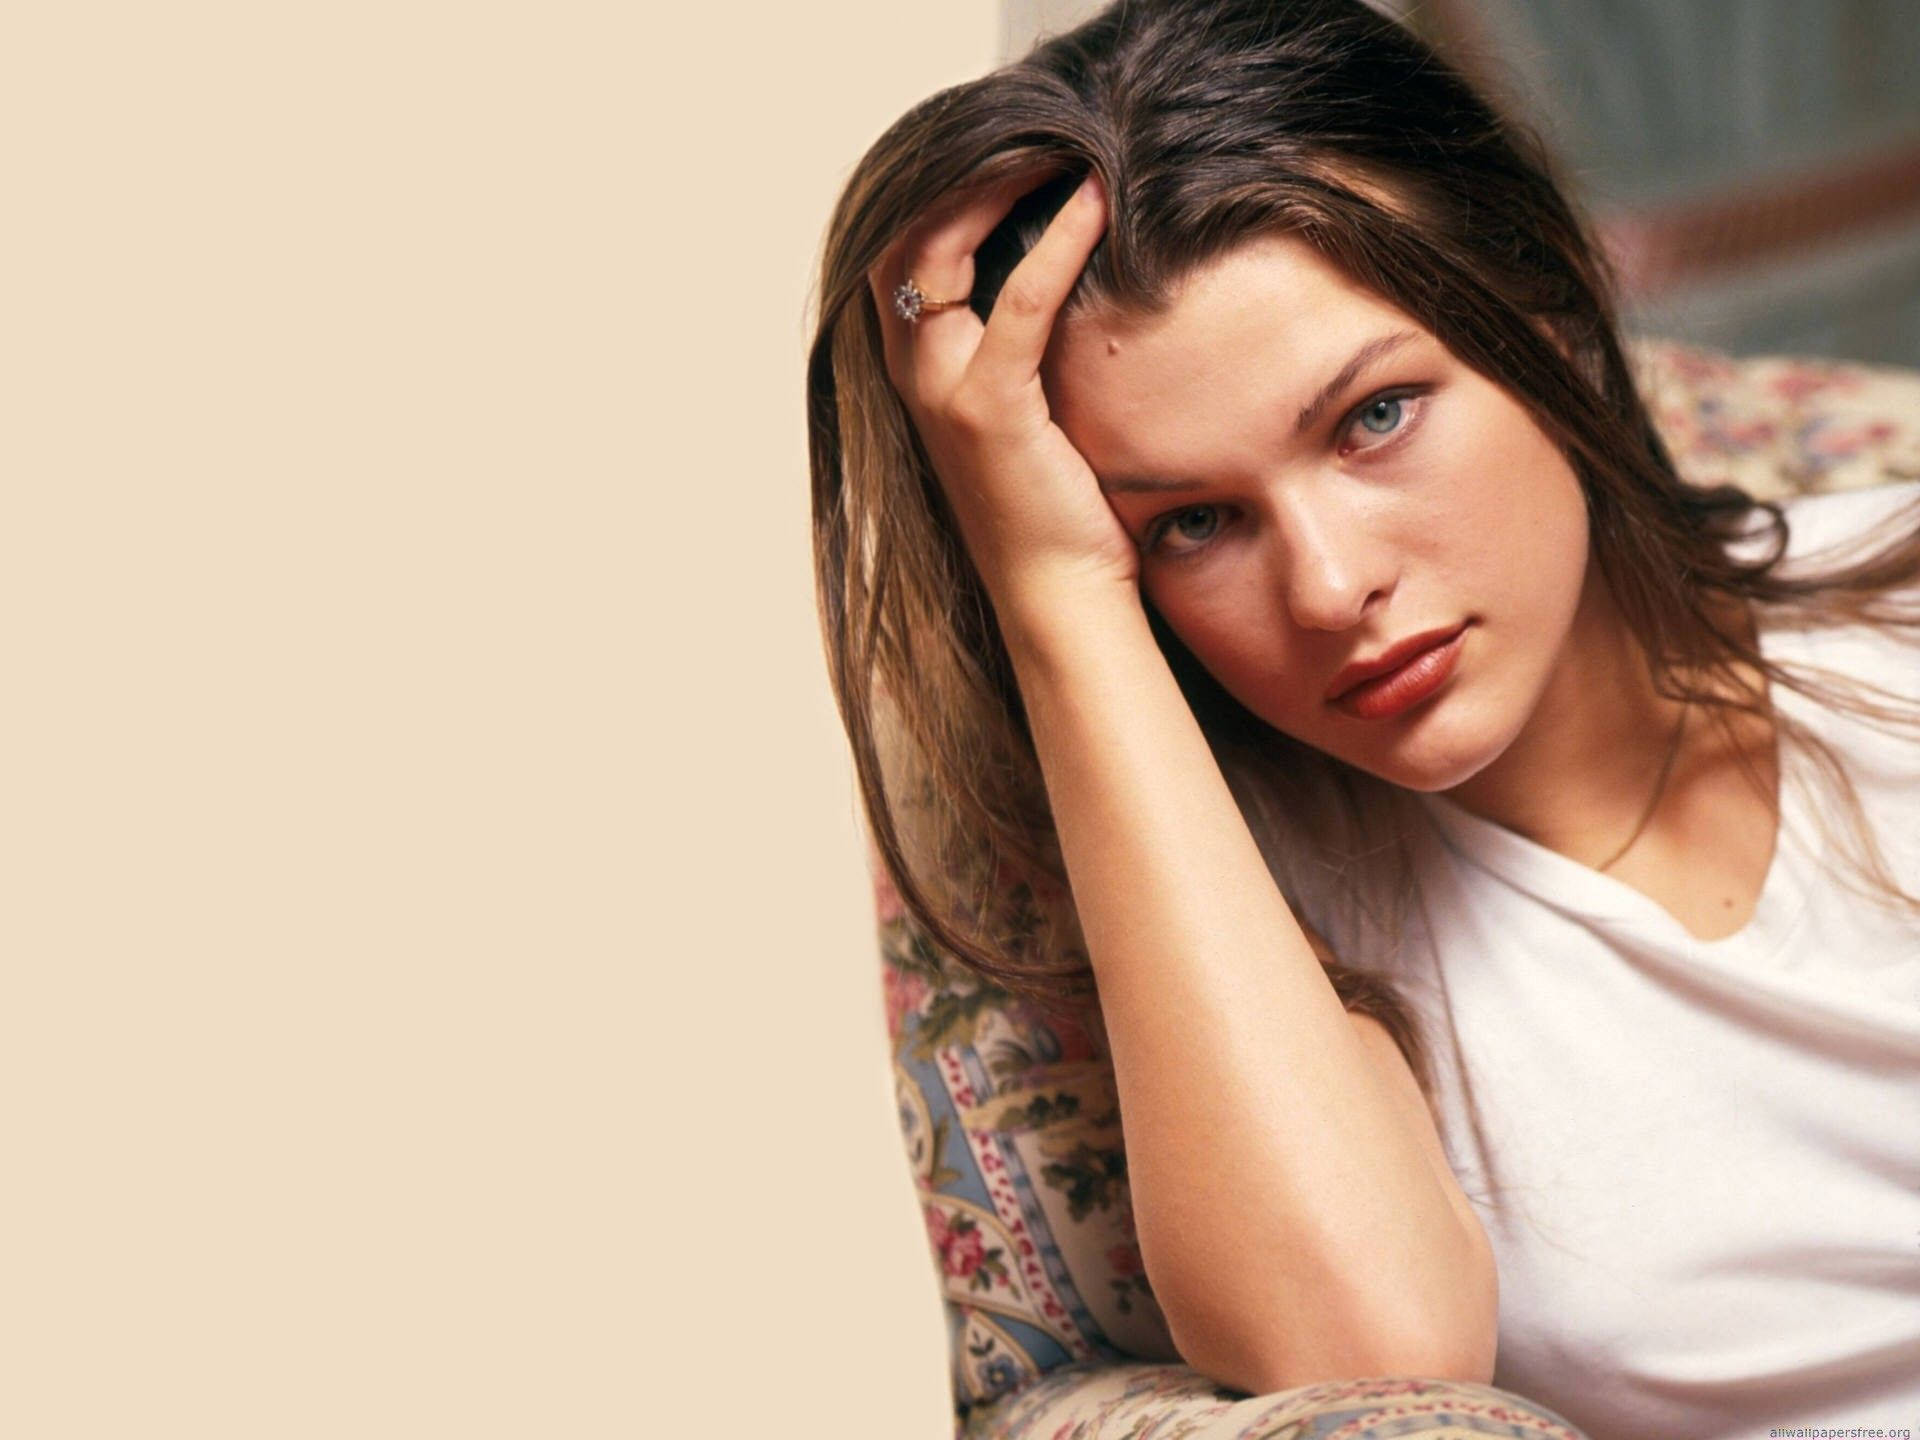 Millajovovich Junges Fotoshooting Bearbeitung Wallpaper